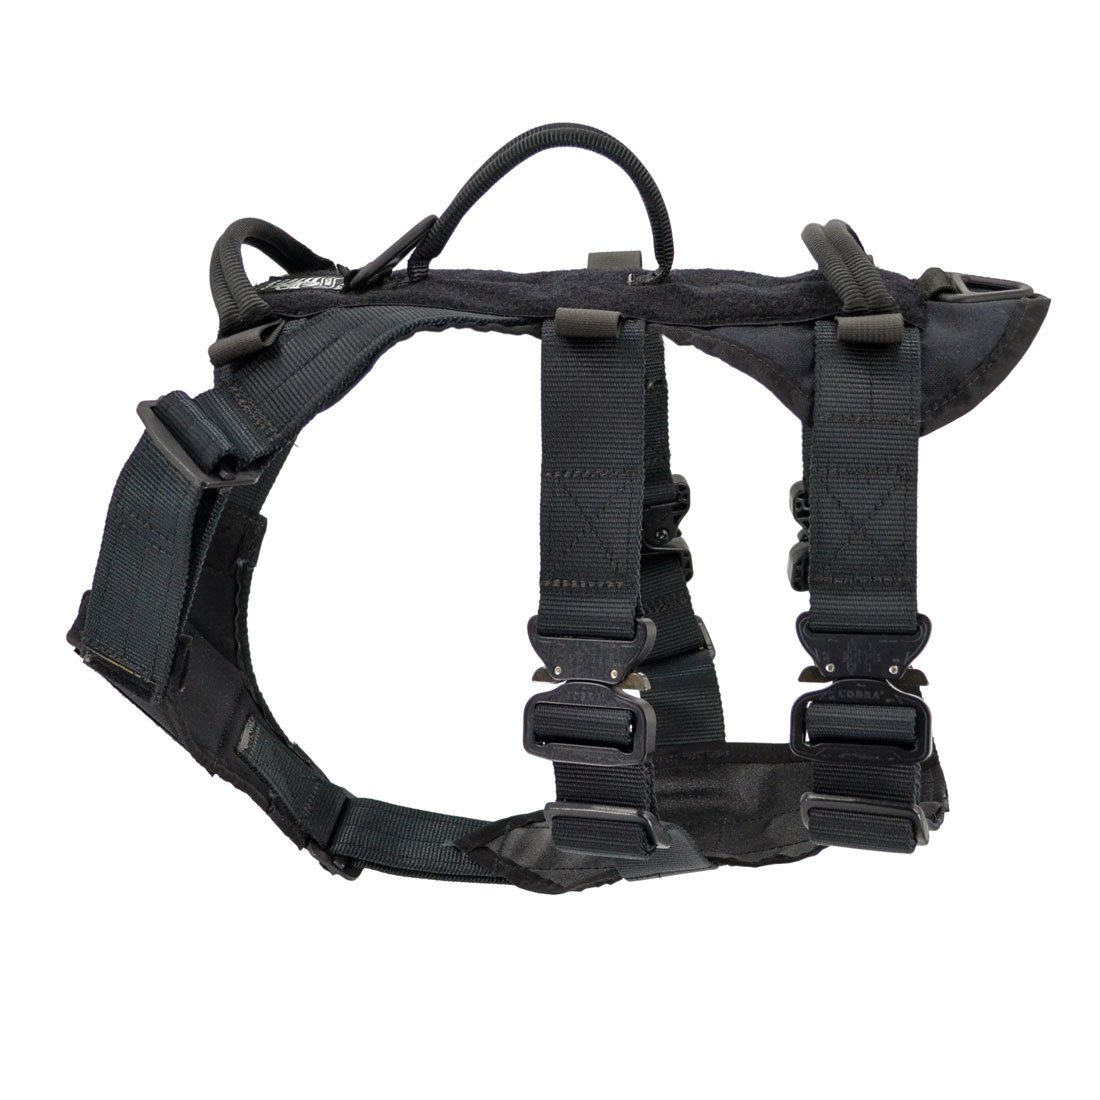 Auroth Dog Harness - Tactical & Training Reflect Harness Gray / Small